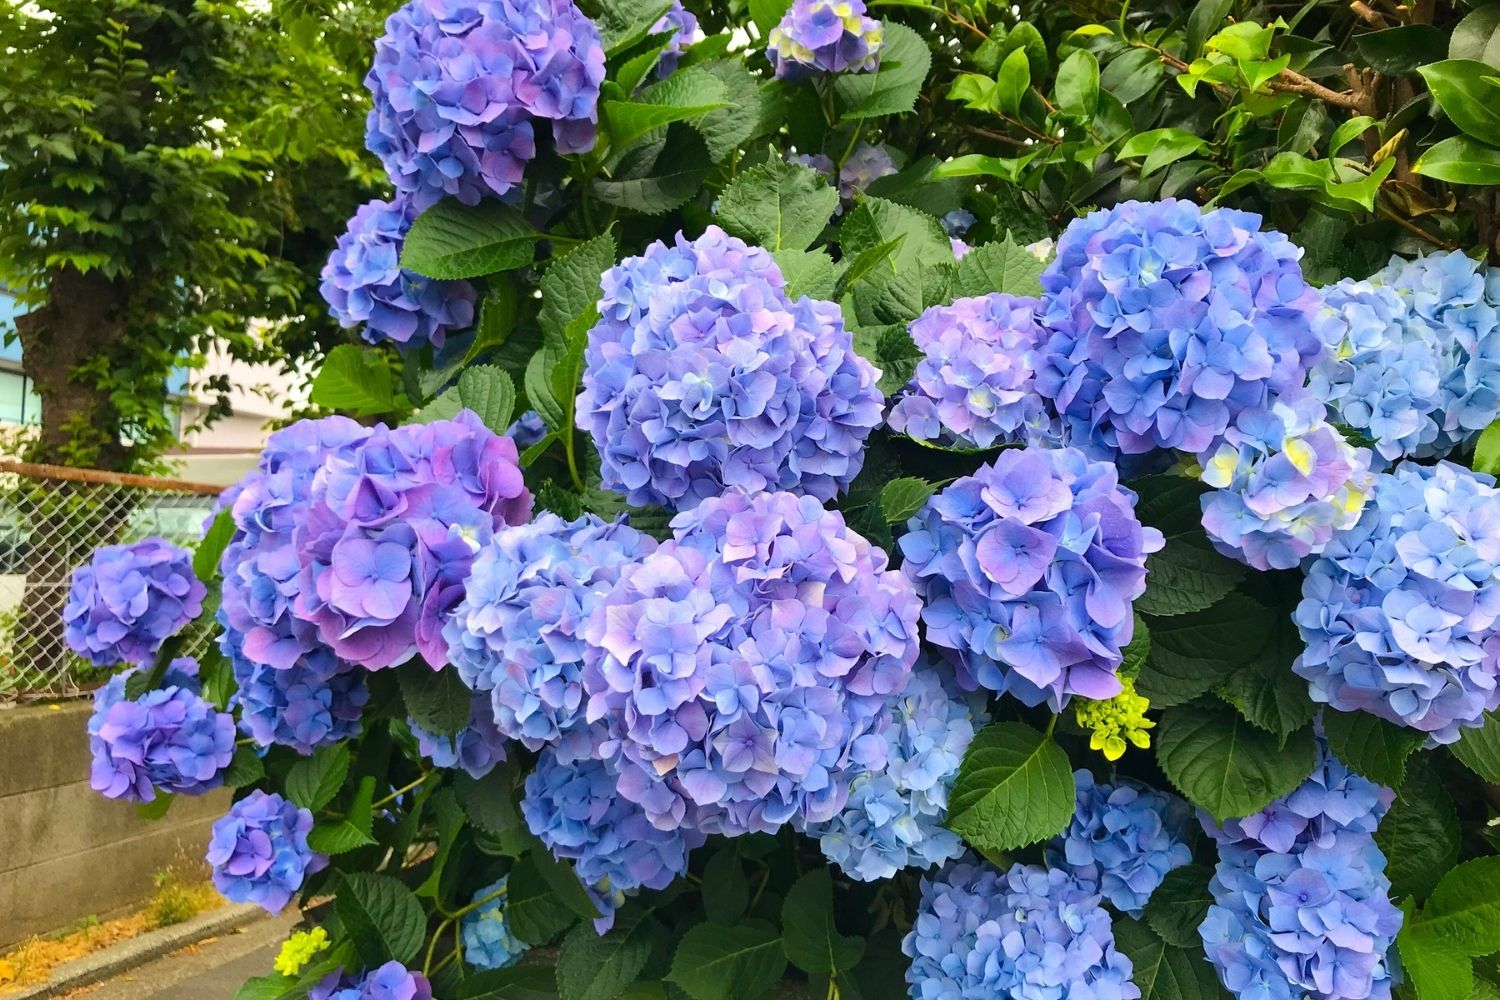 How to get more hydrangea flowers | Better Homes and Gardens